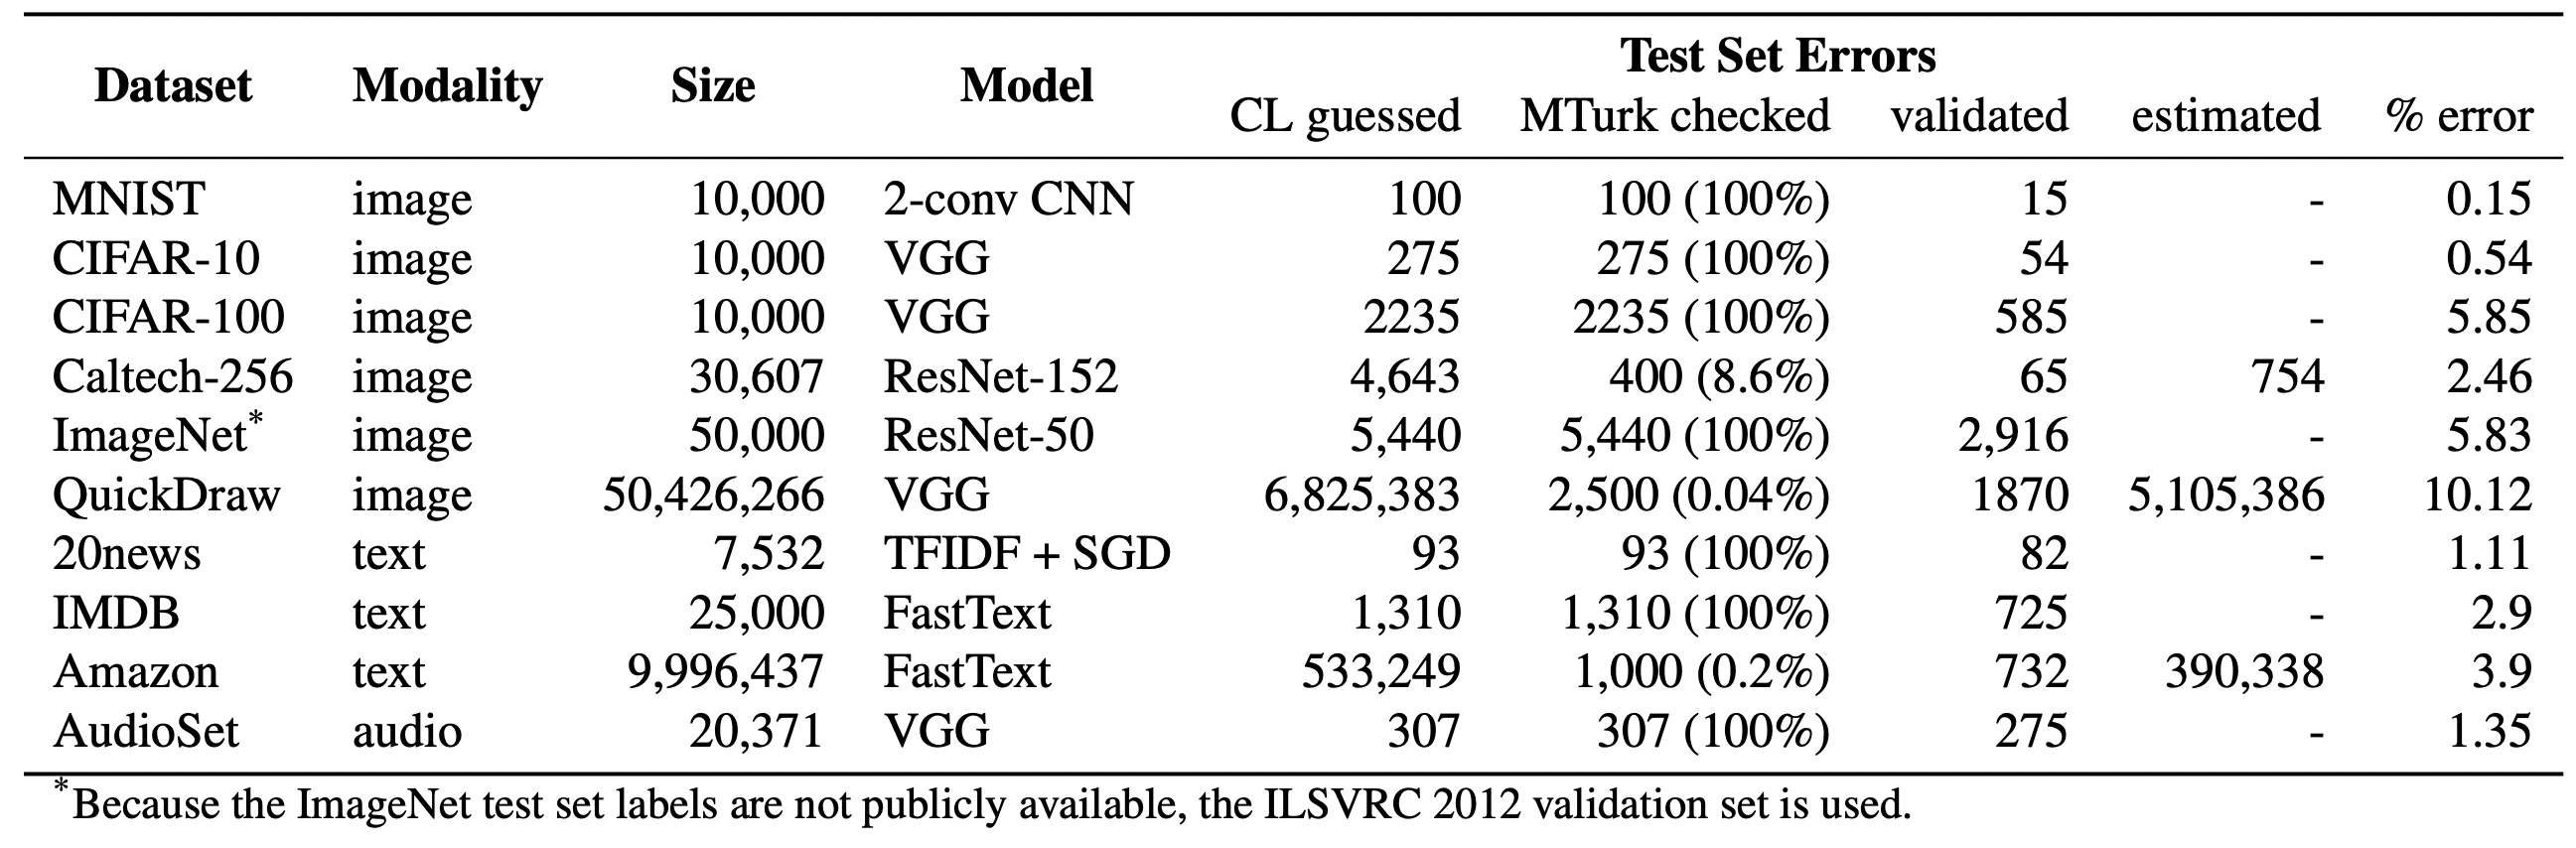 Label Error counts and percentages across 10 popular ML datasets